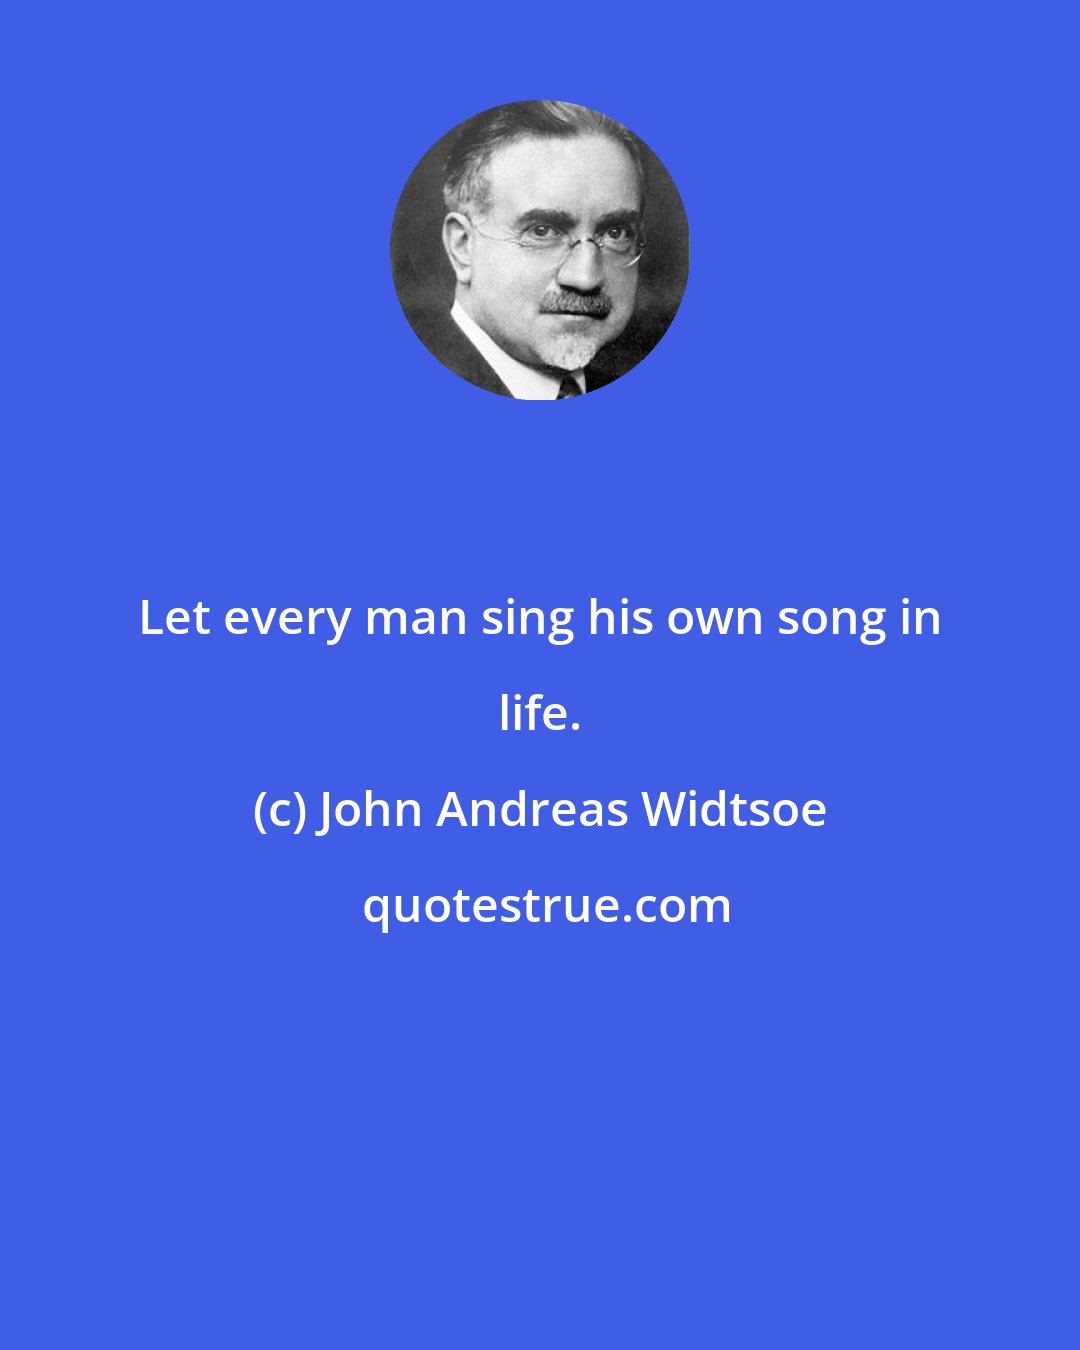 John Andreas Widtsoe: Let every man sing his own song in life.